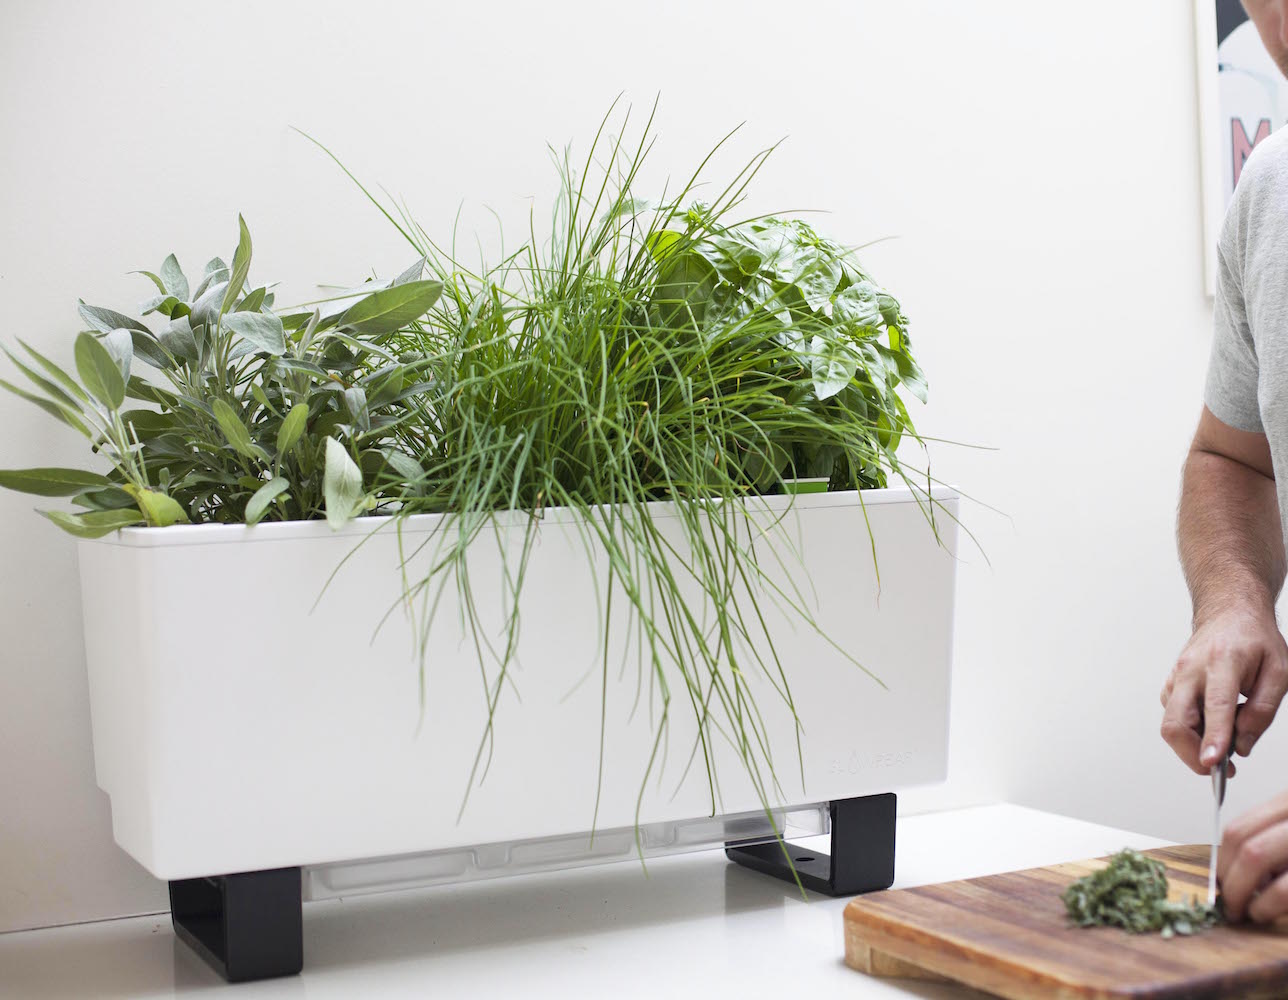 Glowpear Mini Bench self-watering planter creates the ideal growing conditions for plants